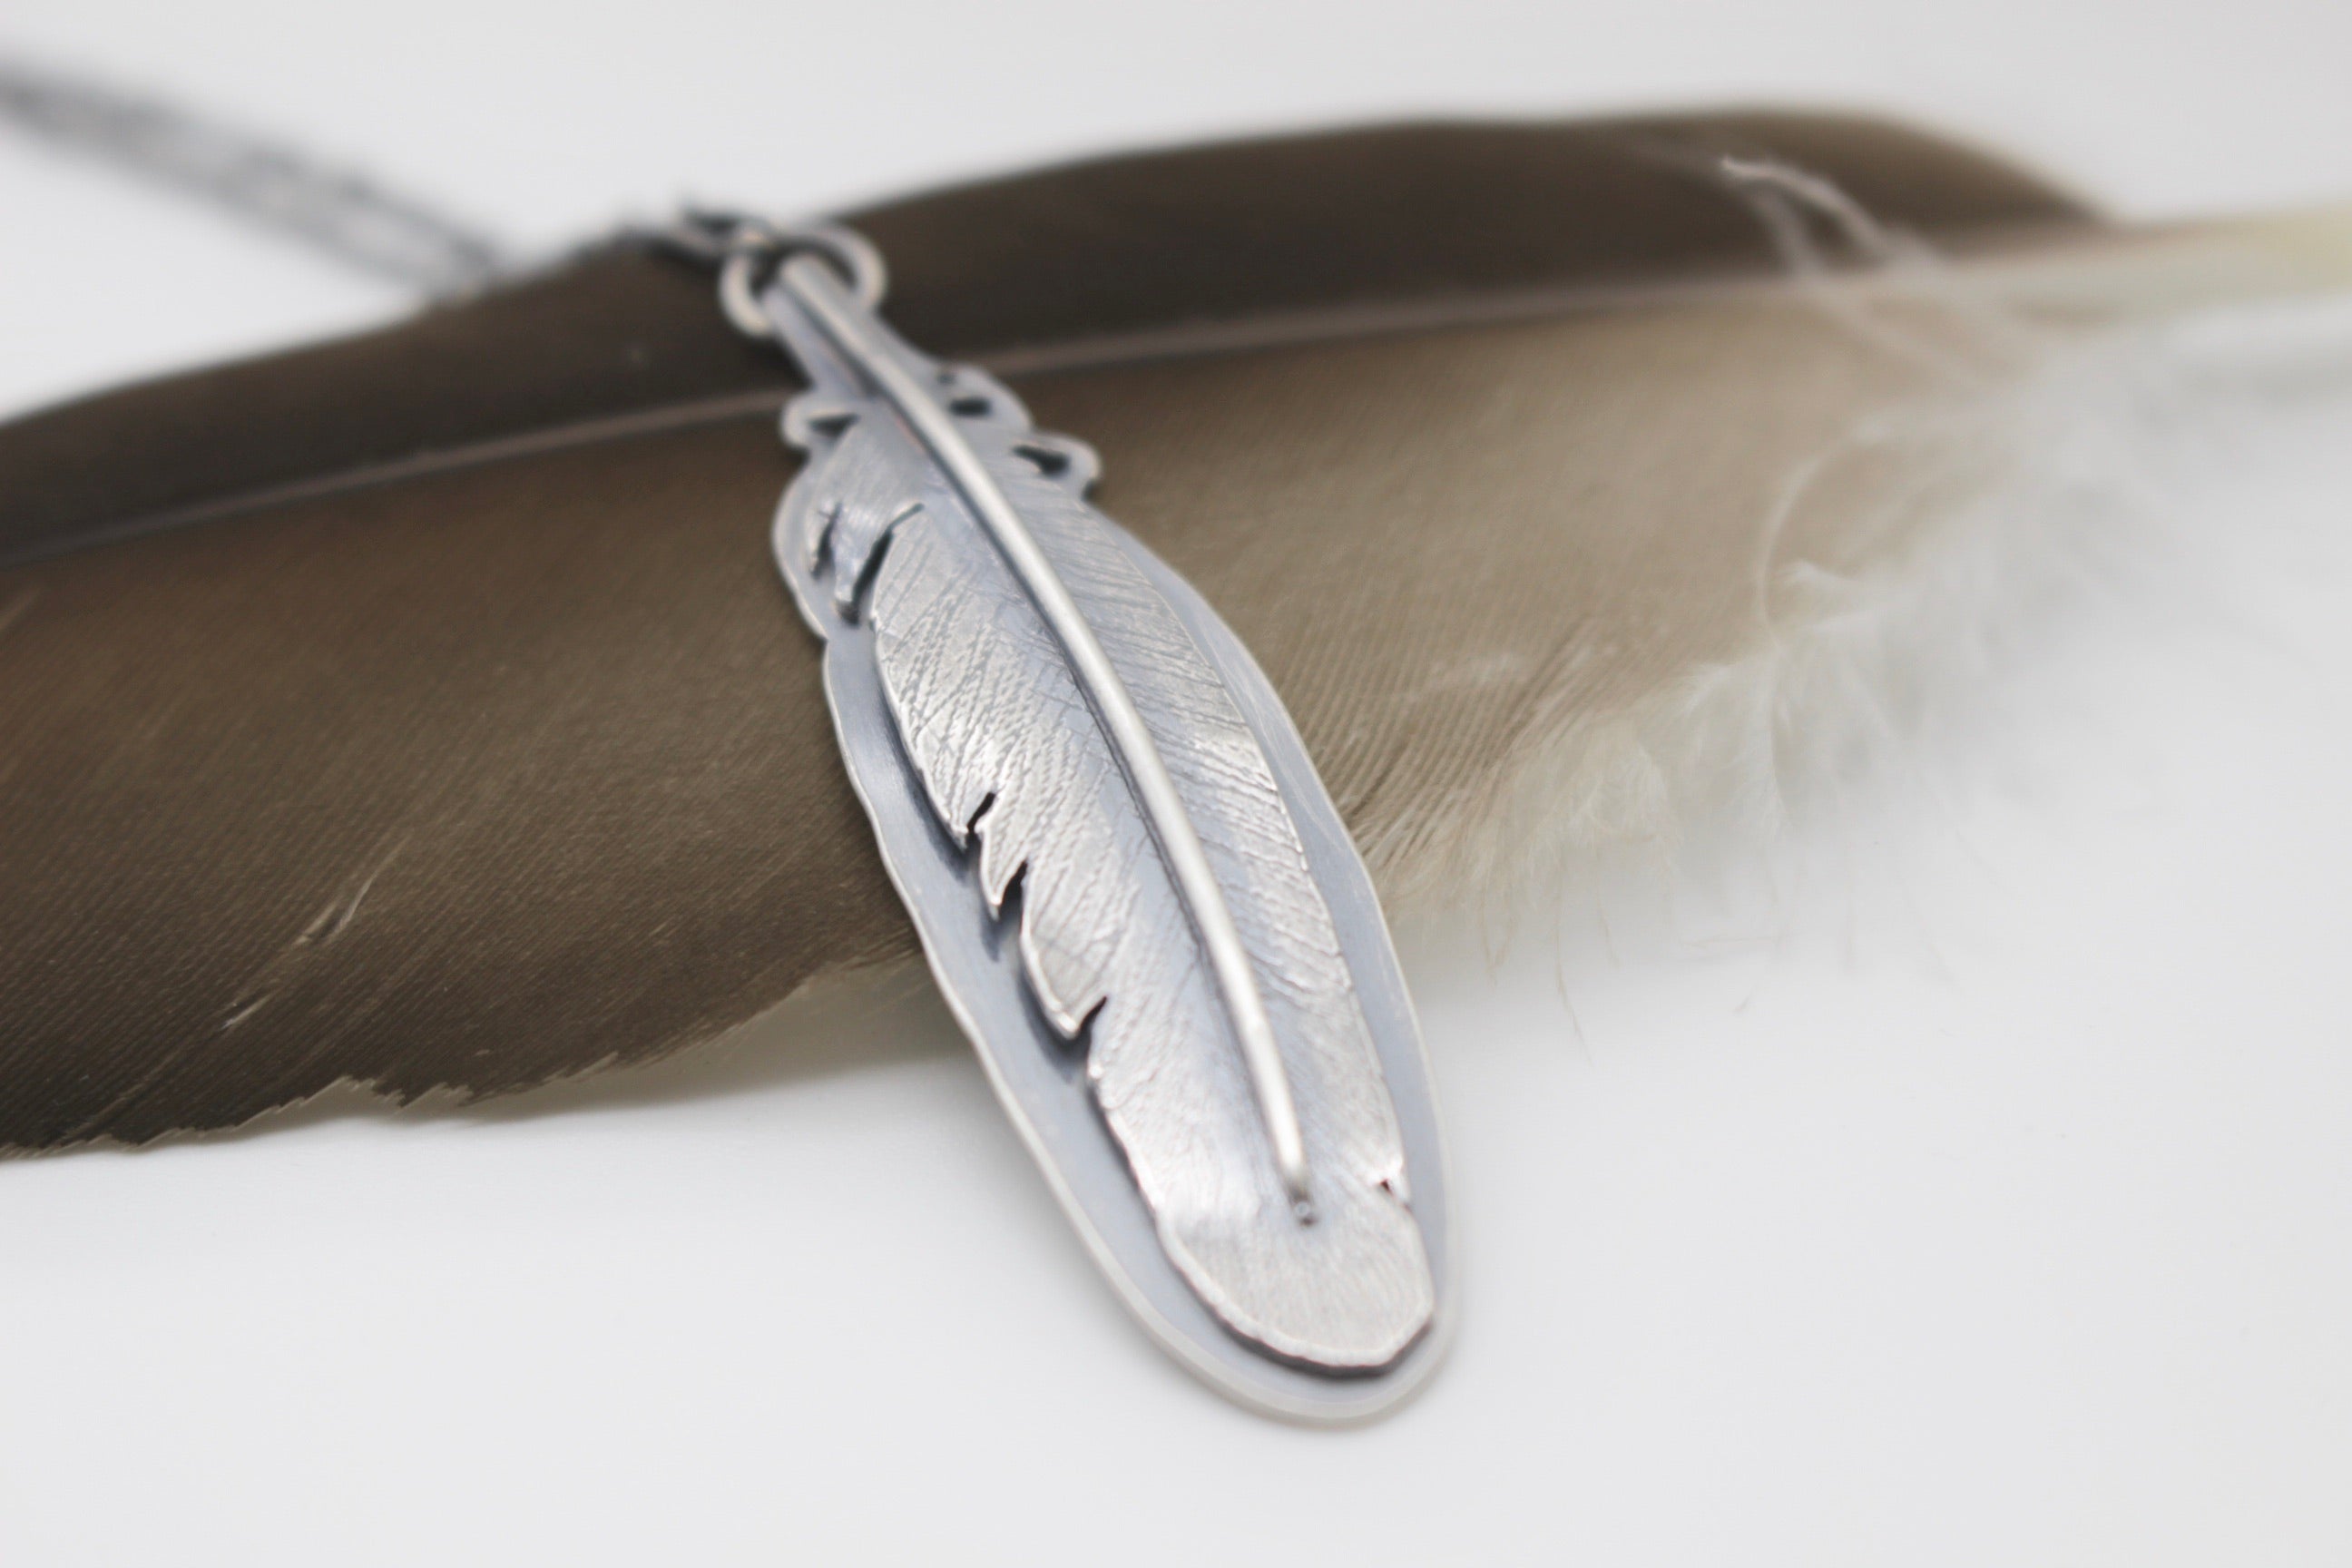 Sterling silver feather necklace